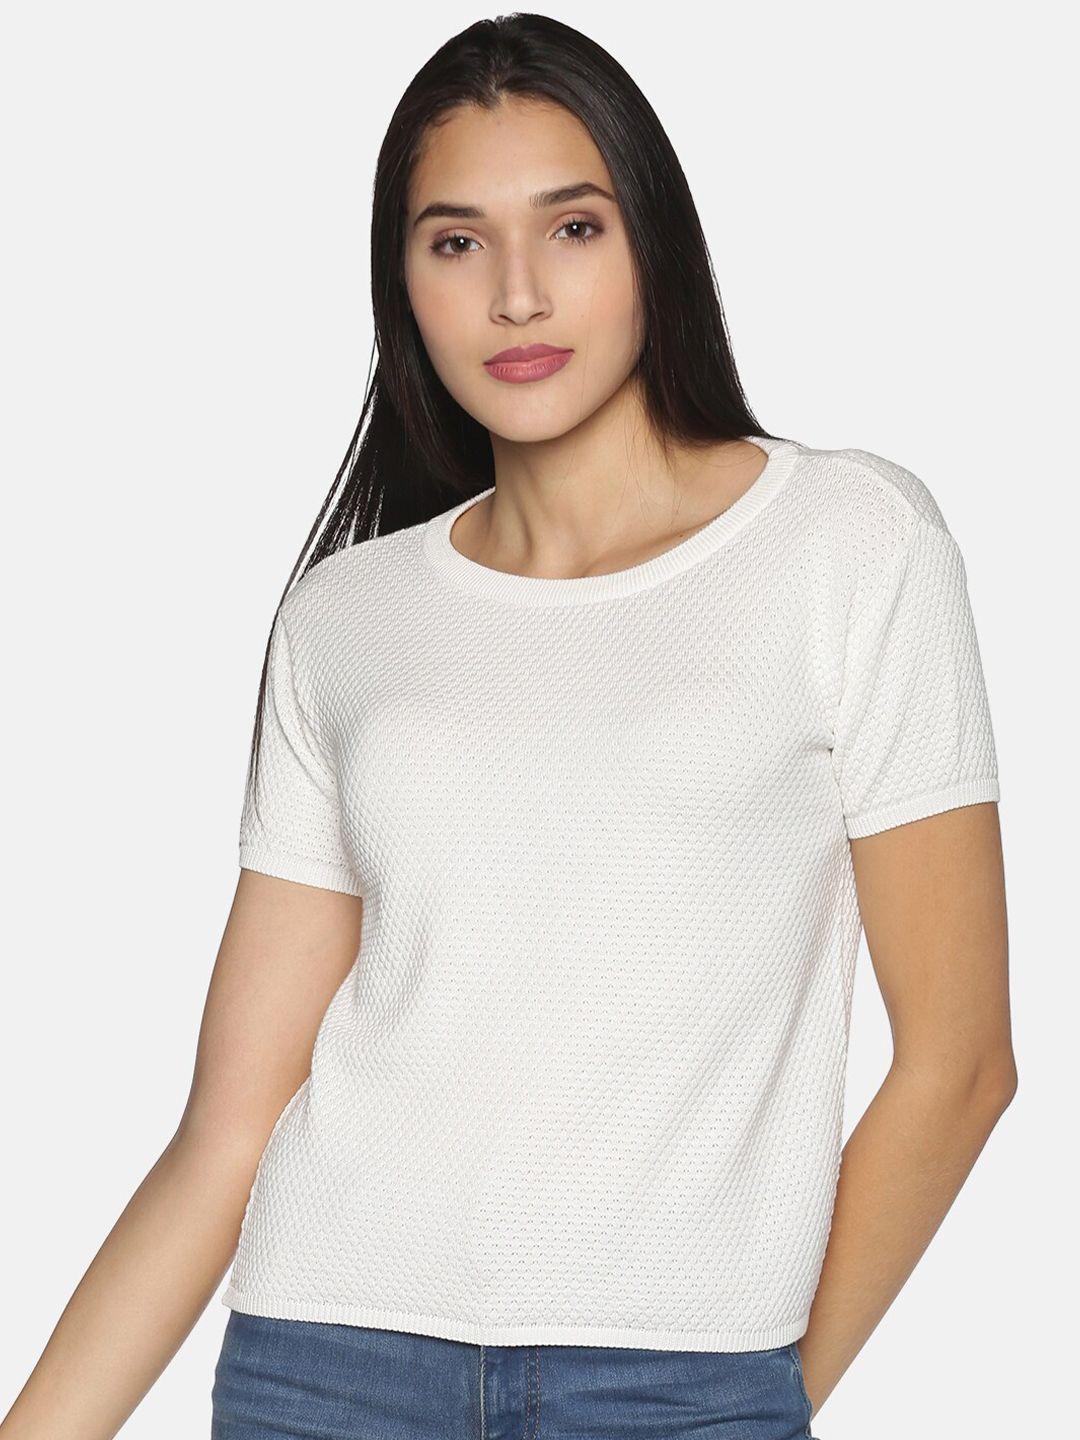 blissclub women white pure cotton step out top